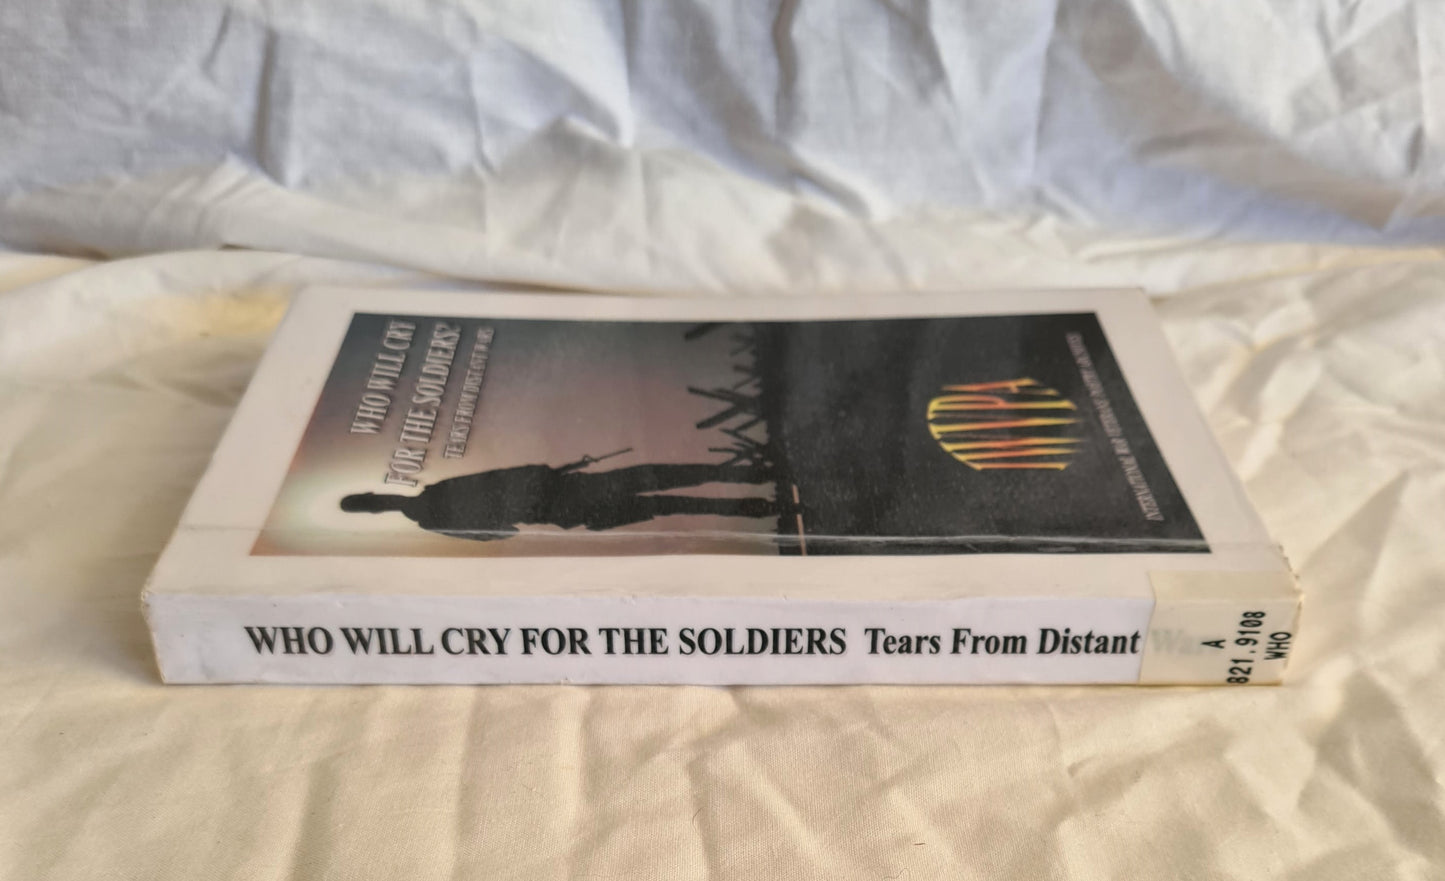 Who Will Cry For The Soldiers? by Anthony W. “Bushranger” Pahl and Mike “Subs” Subritzky